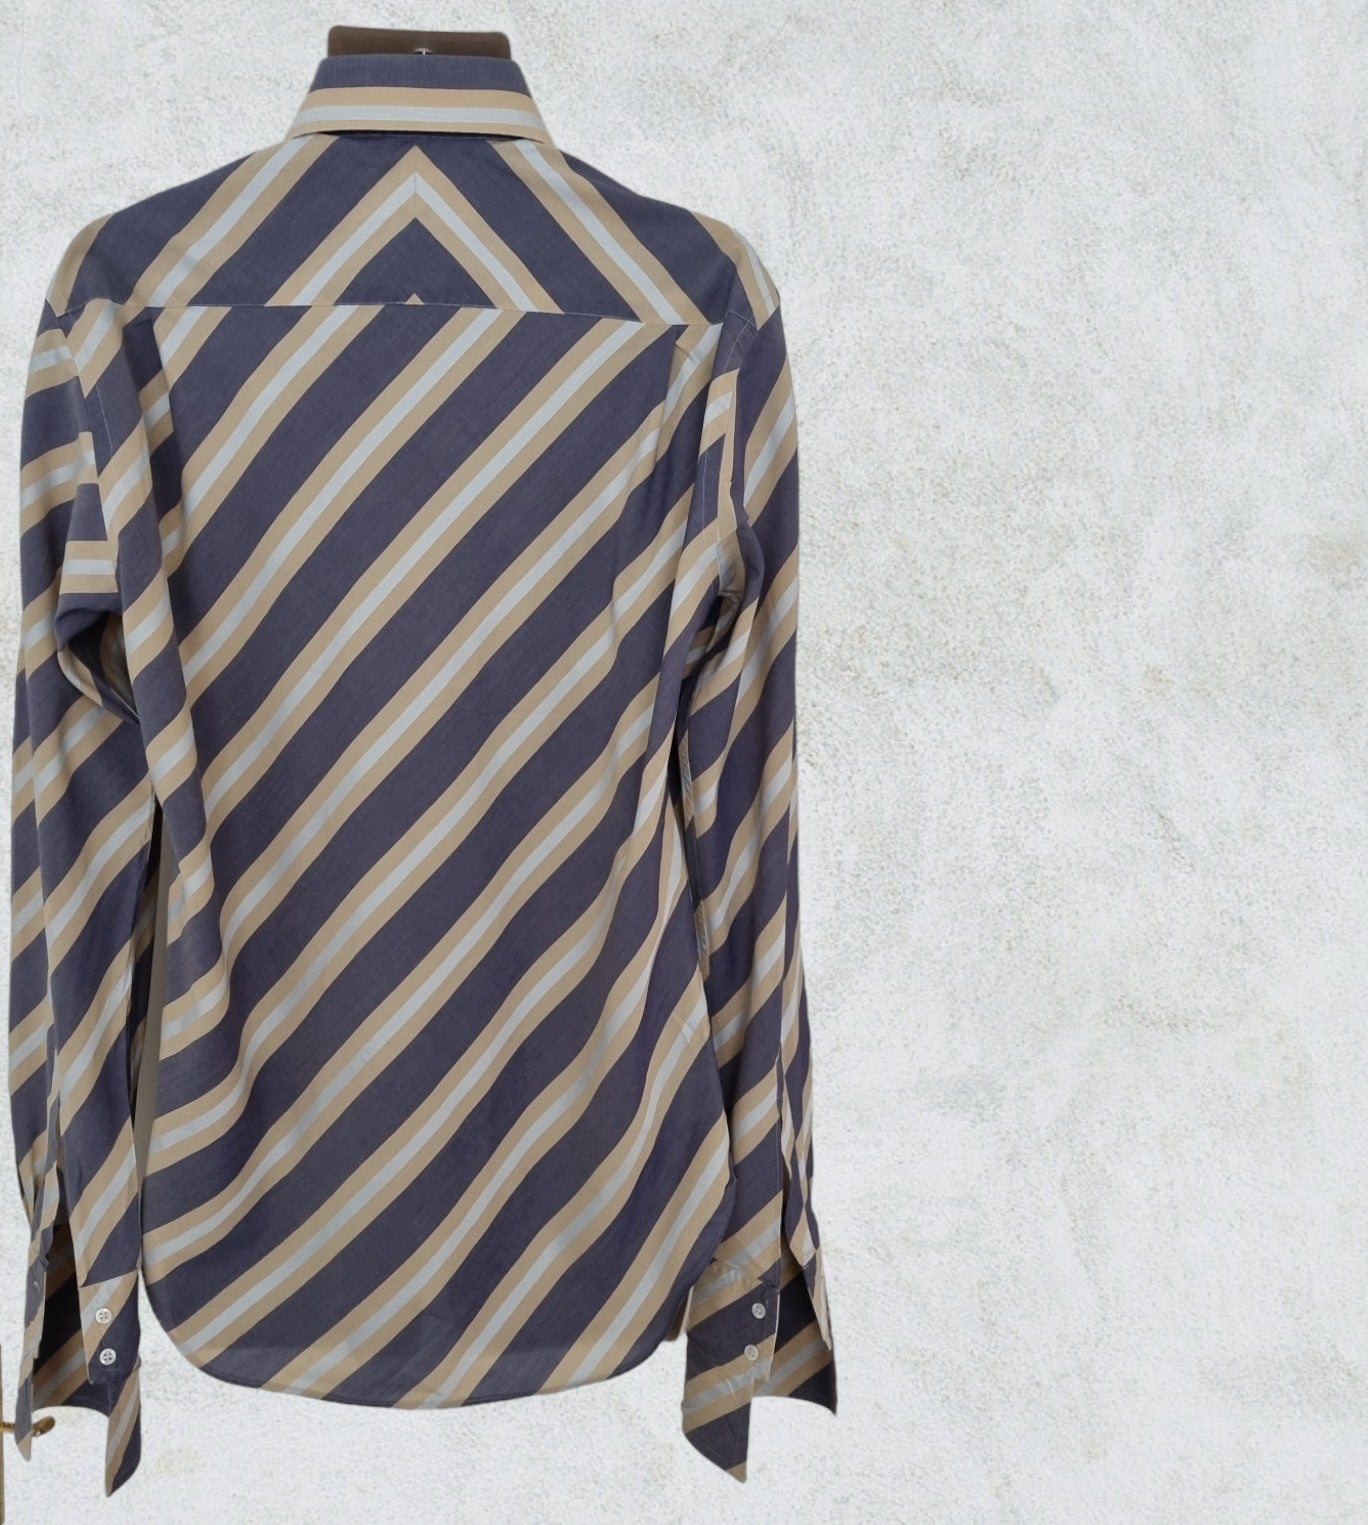 Mulberry Mens Grey, Beige & Cream Striped Long Sleeve Shirt Size 16/41 Timeless Fashions